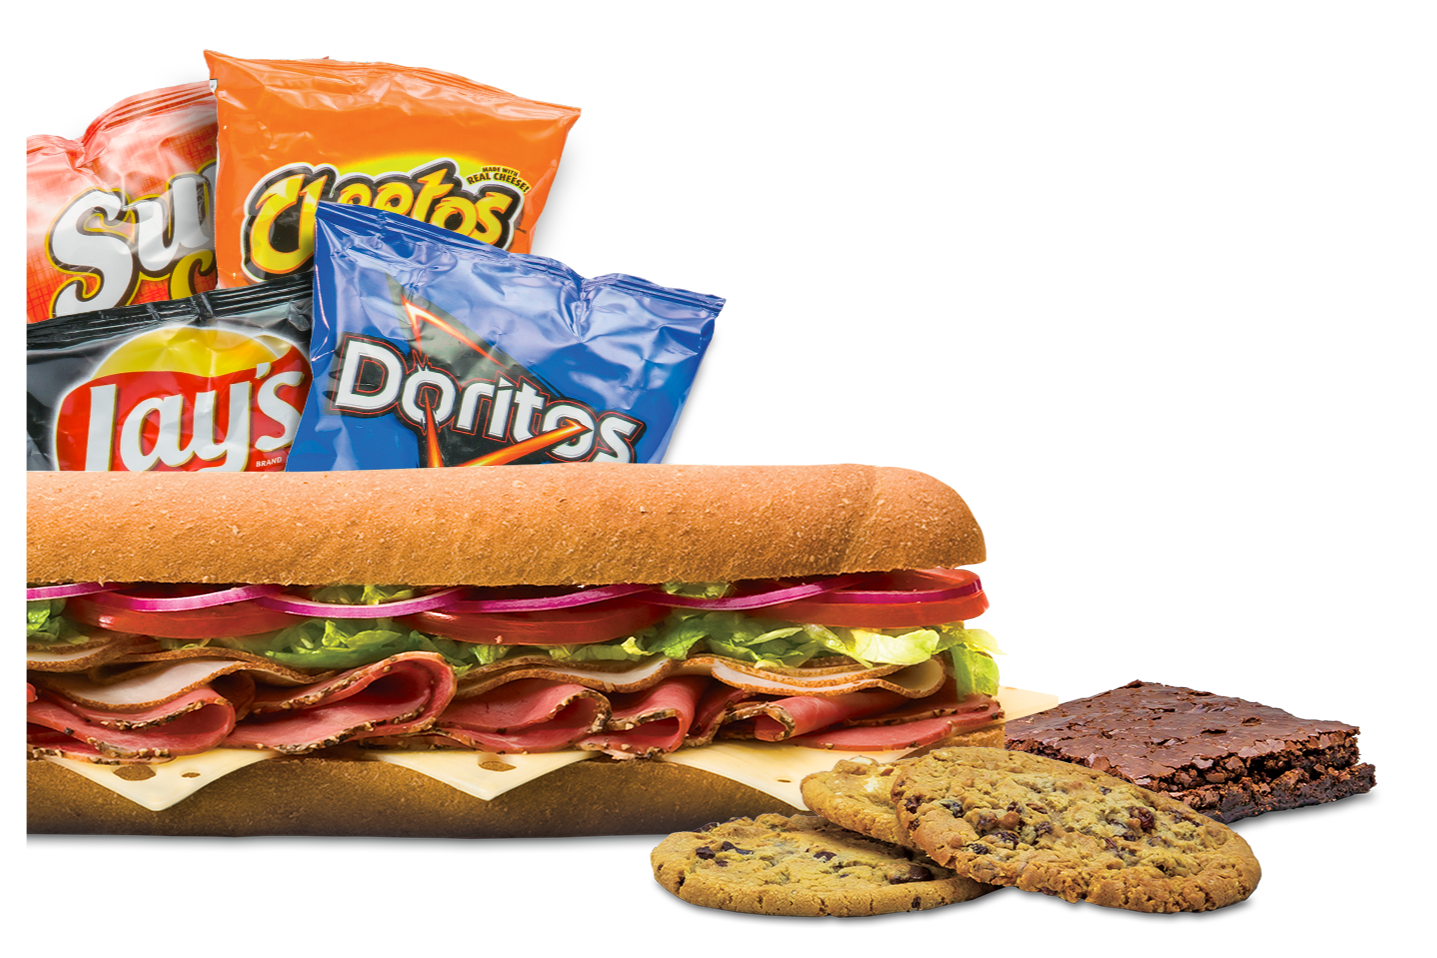 Each Relief Pack includes a 2-foot classic sub, 4 bags of chips, and 4 desserts